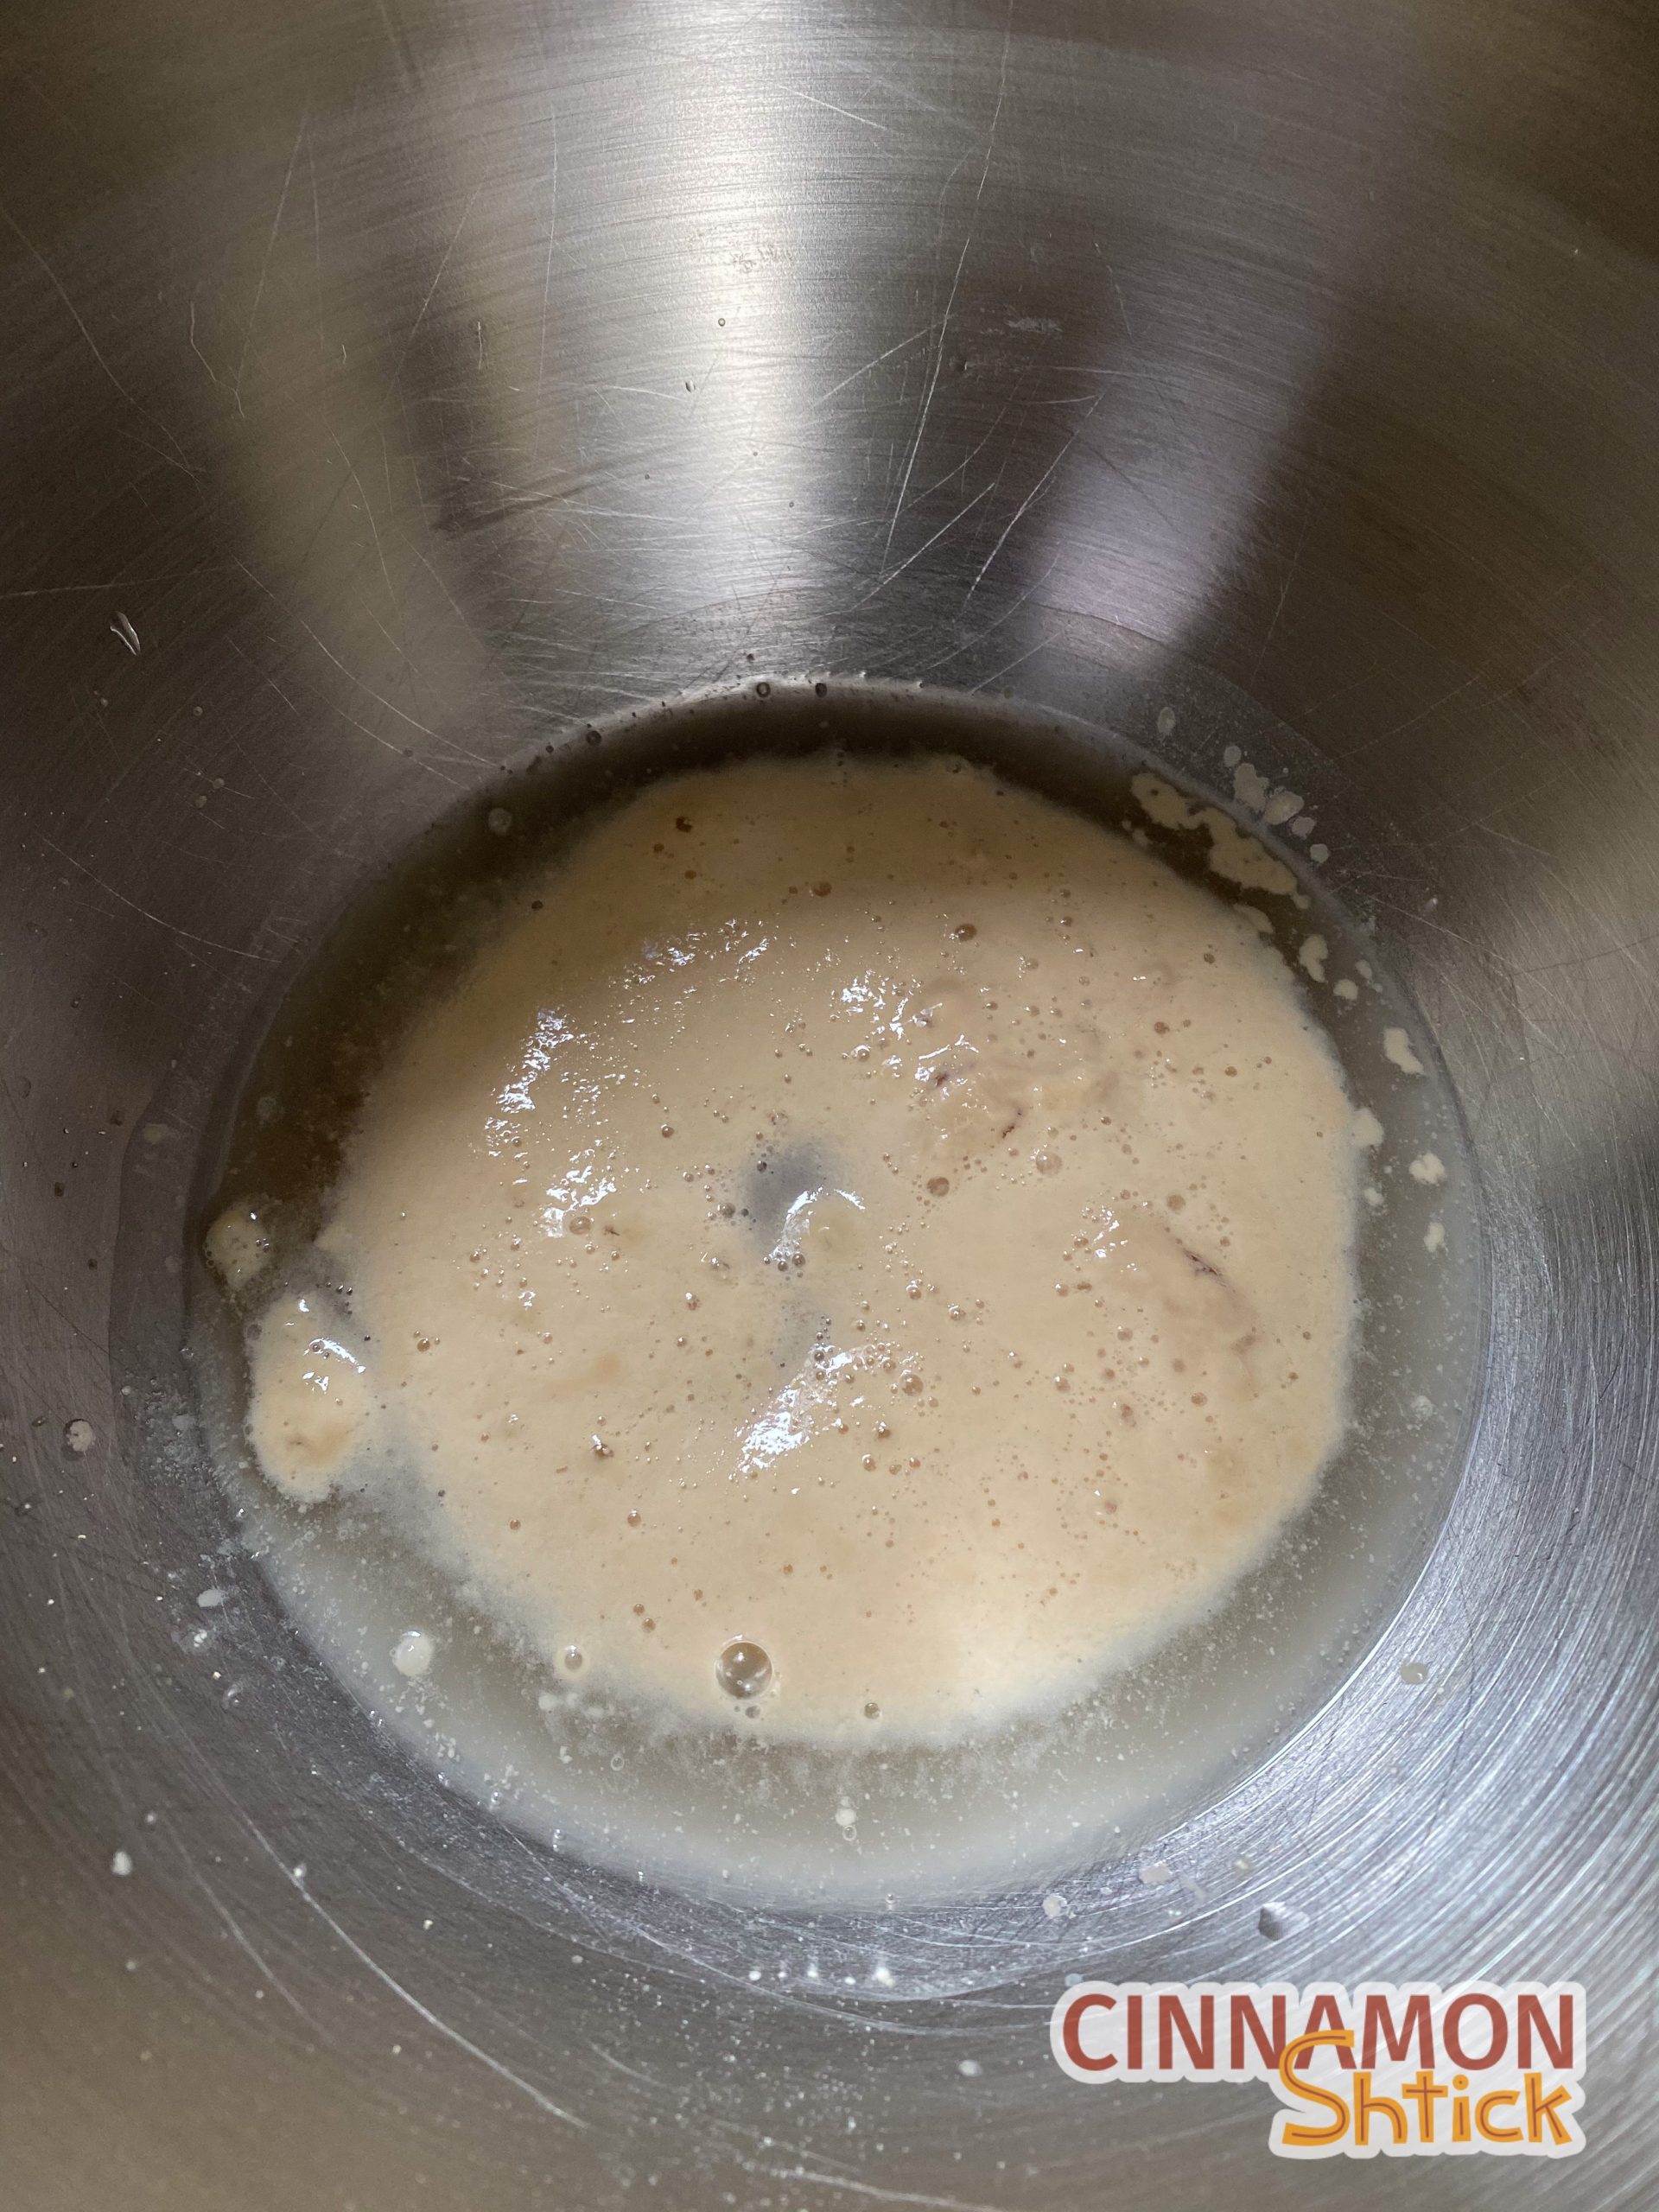 Yeast dissolved in water starting to bubble